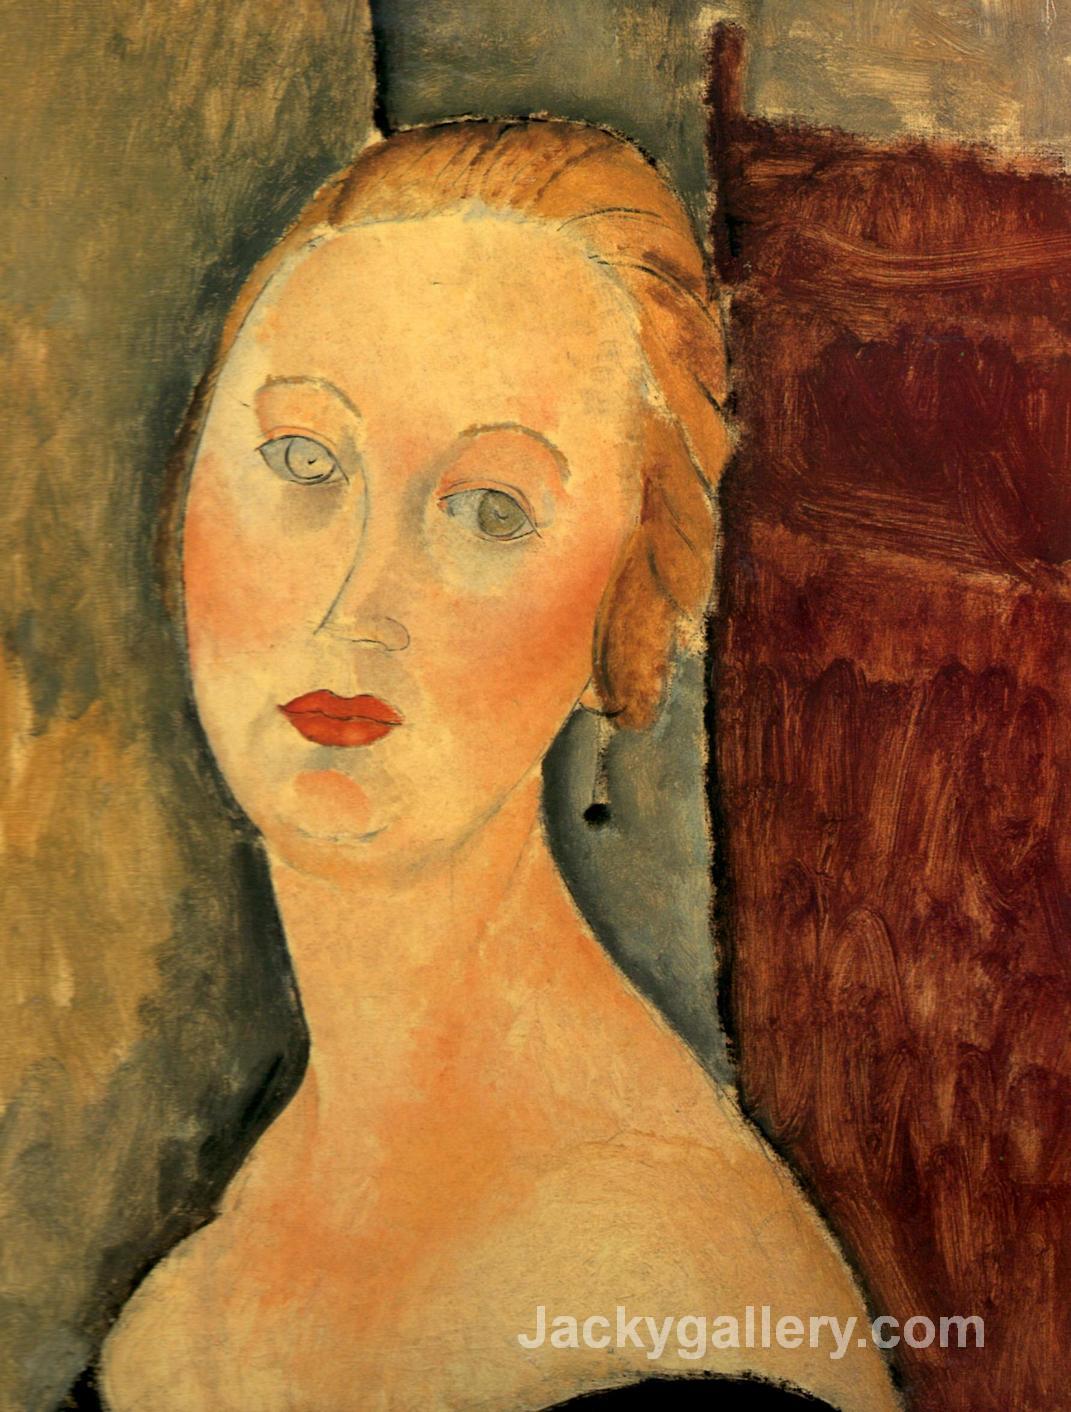 Germaine Survage with Earrings by Amedeo Modigliani paintings reproduction